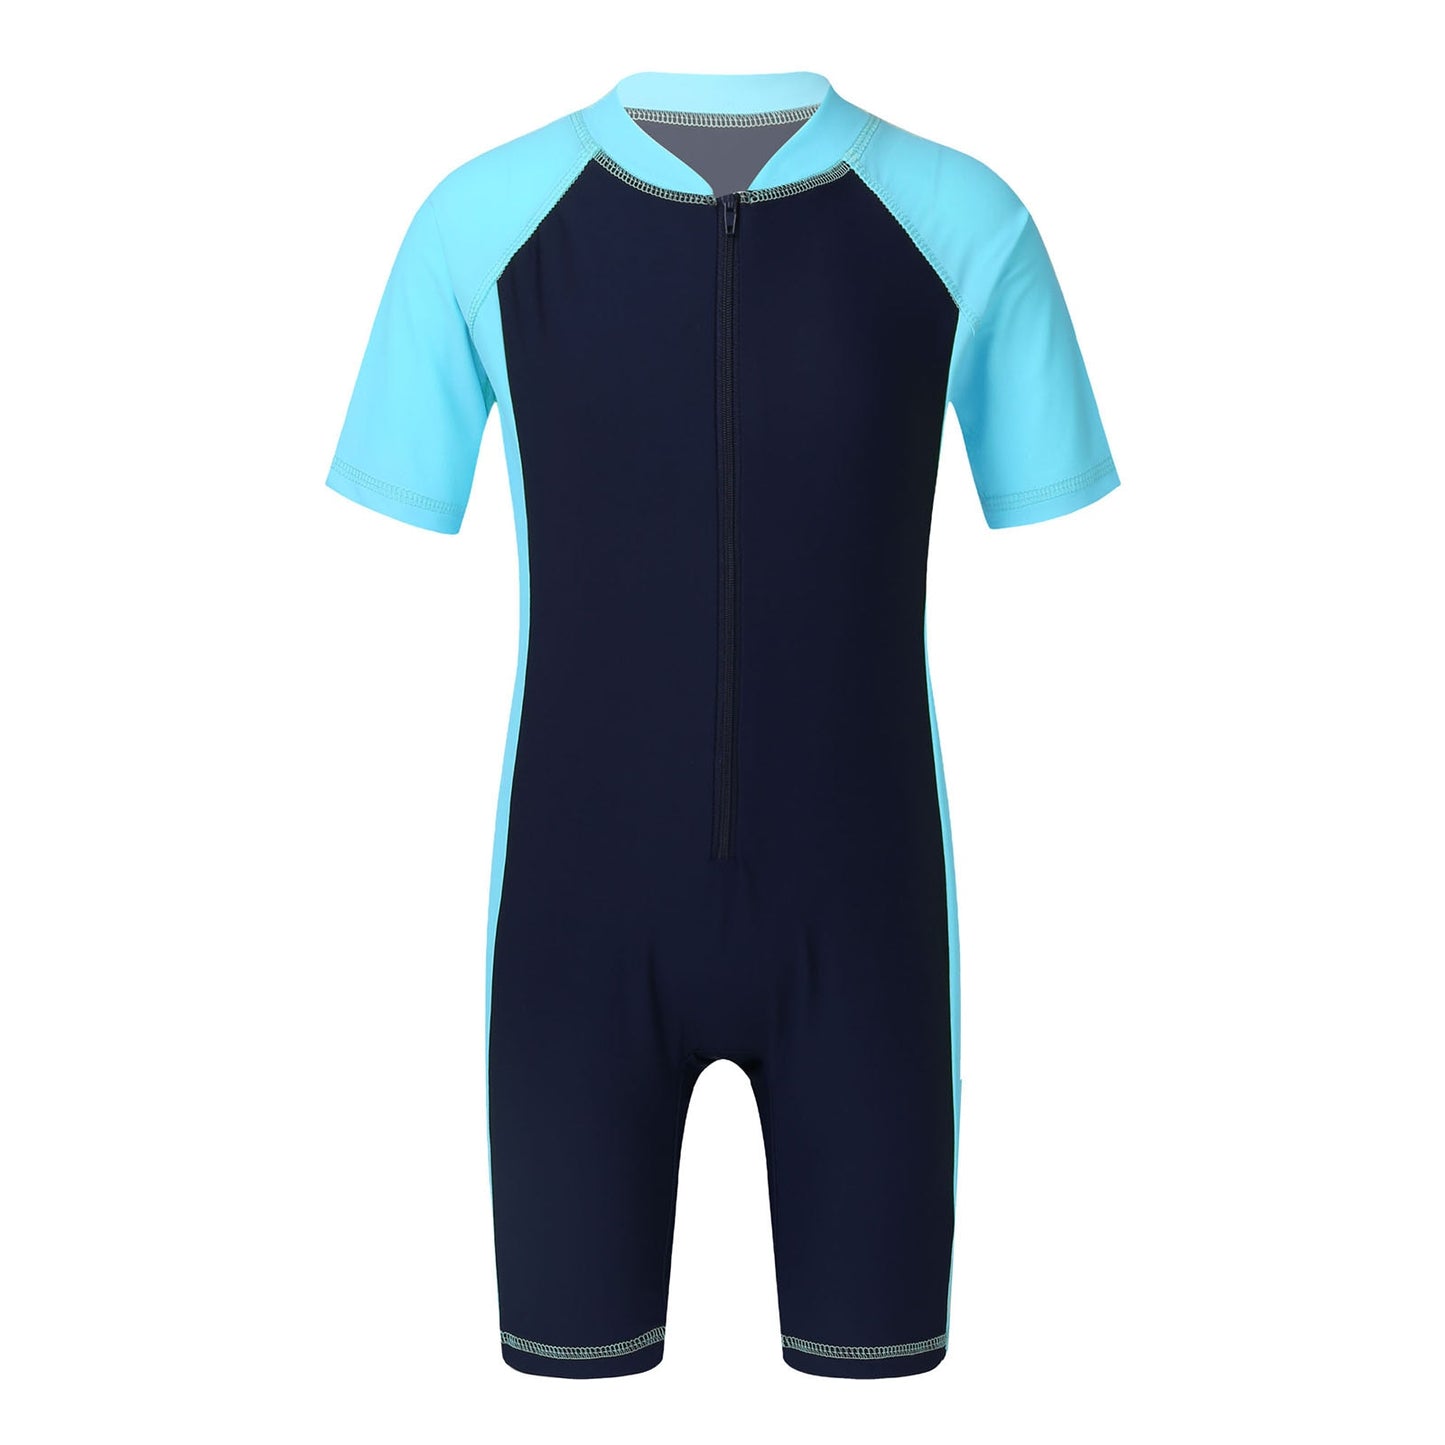 Kids Boys Swimsuits Wetsuit One Piece Rash Guard Swimming Bathing Suit For Boys And Girls